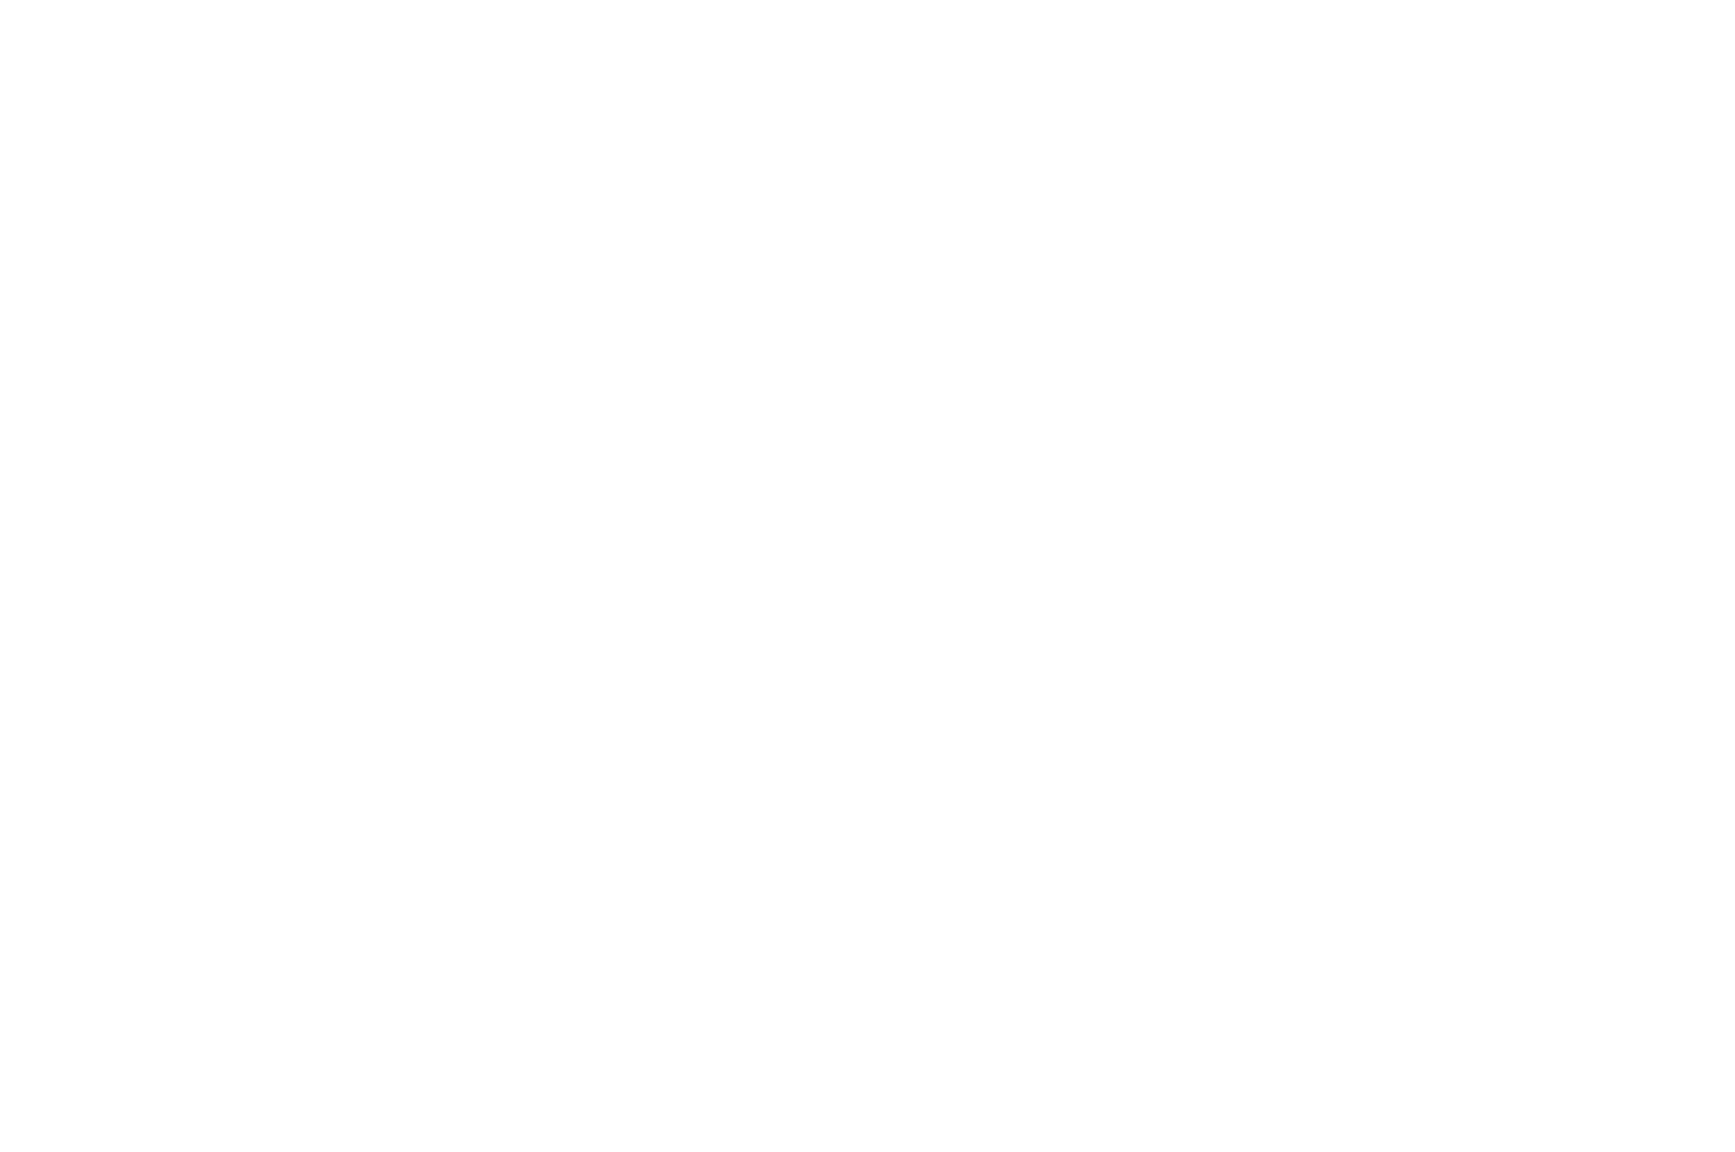 OFFICIAL SELECTION - Miami Fashion Film Festival - 2017.png